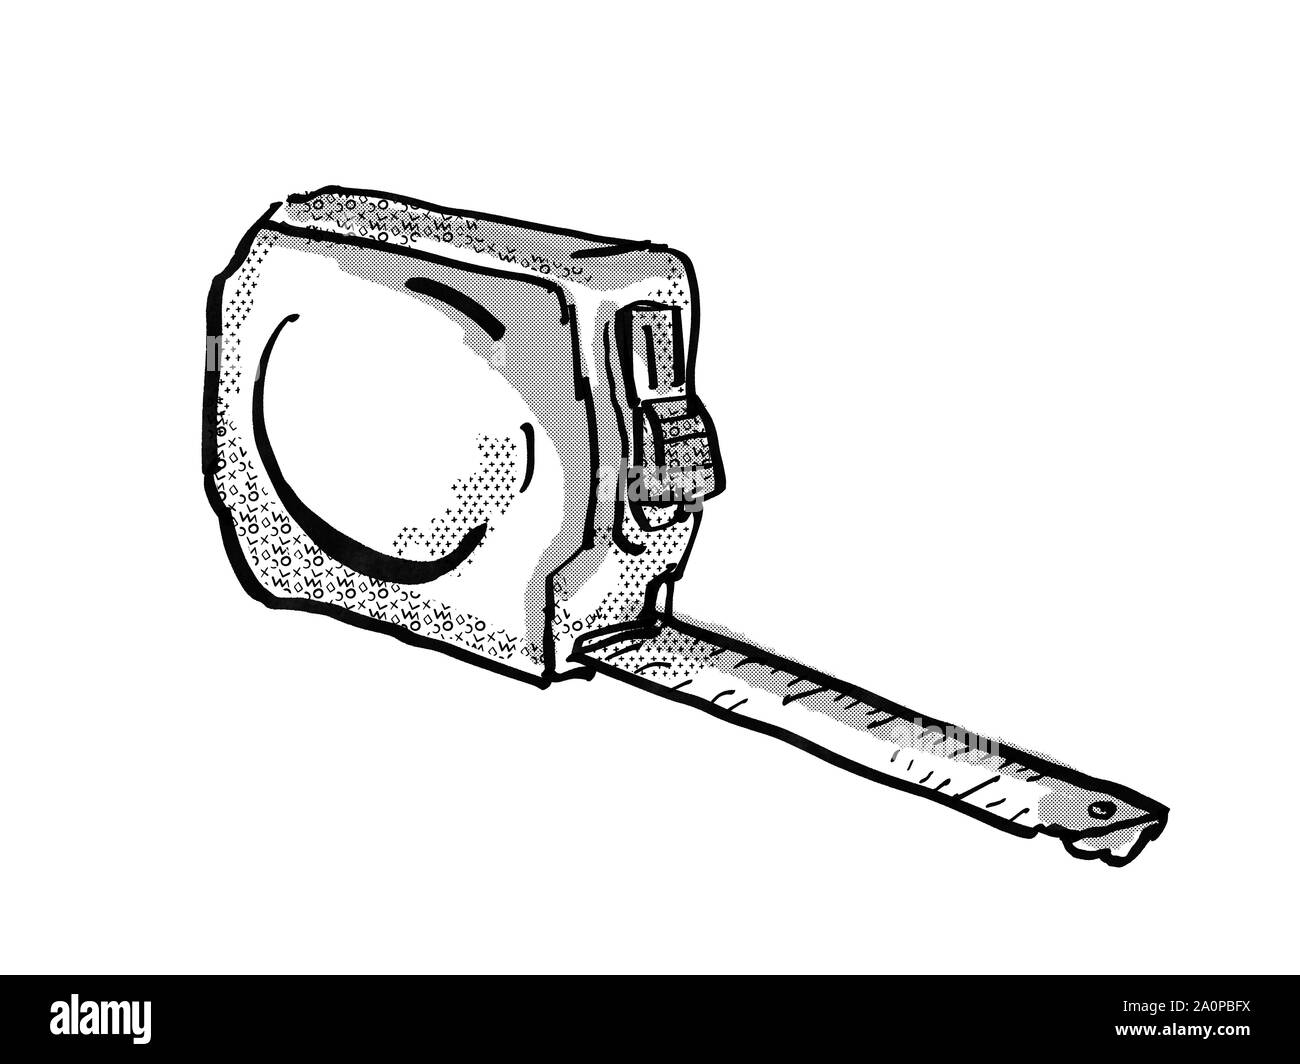 Retro cartoon style drawing of a measuring tape or tape measure on isolated white background done in black and white Stock Photo